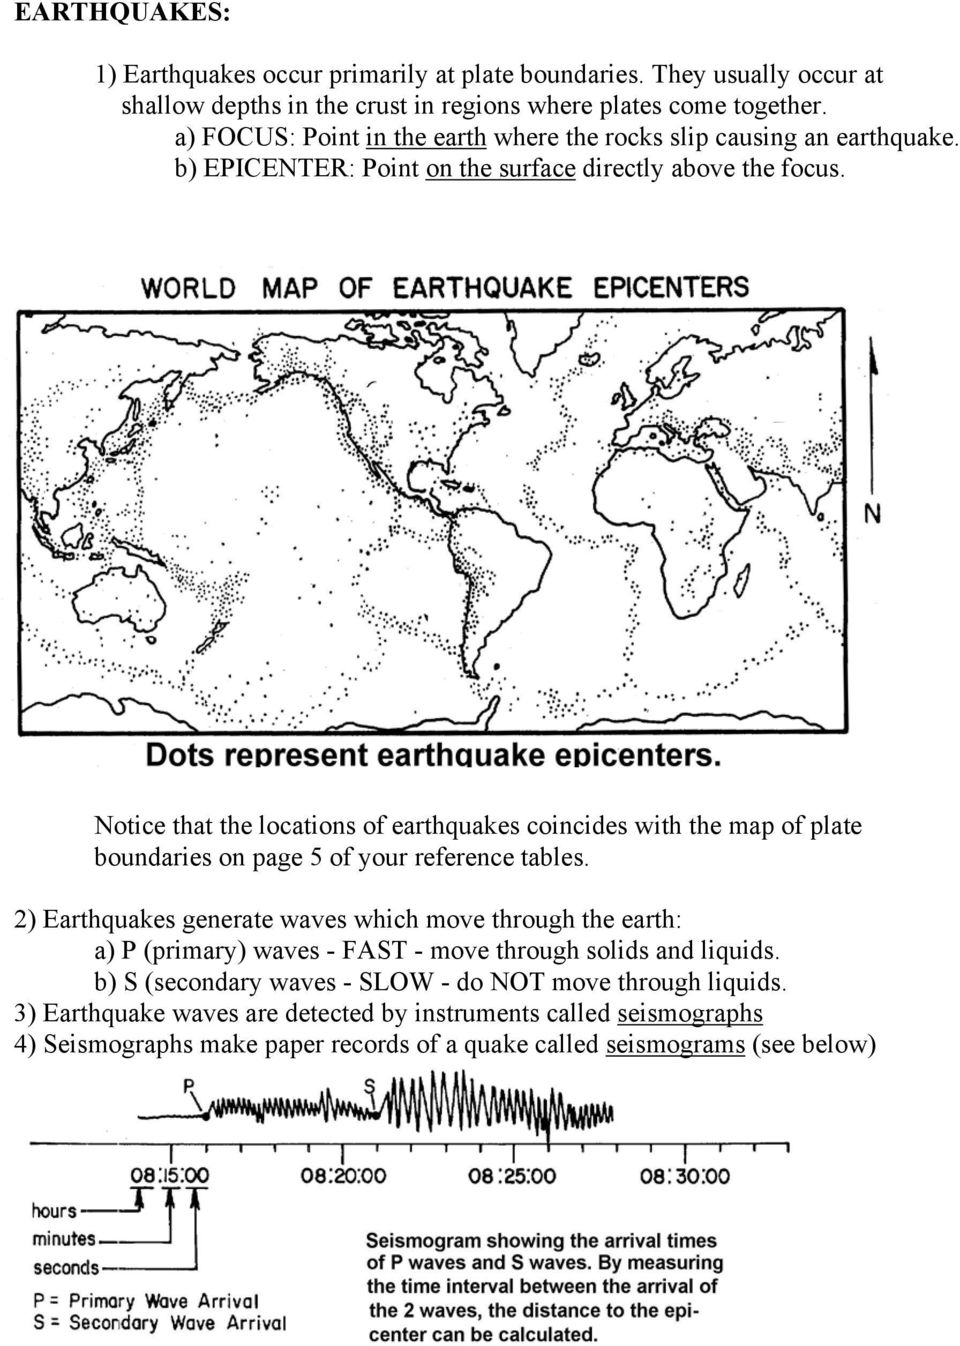 Notice that the locations of earthquakes coincides with the map of plate boundaries on page 5 of your reference tables.